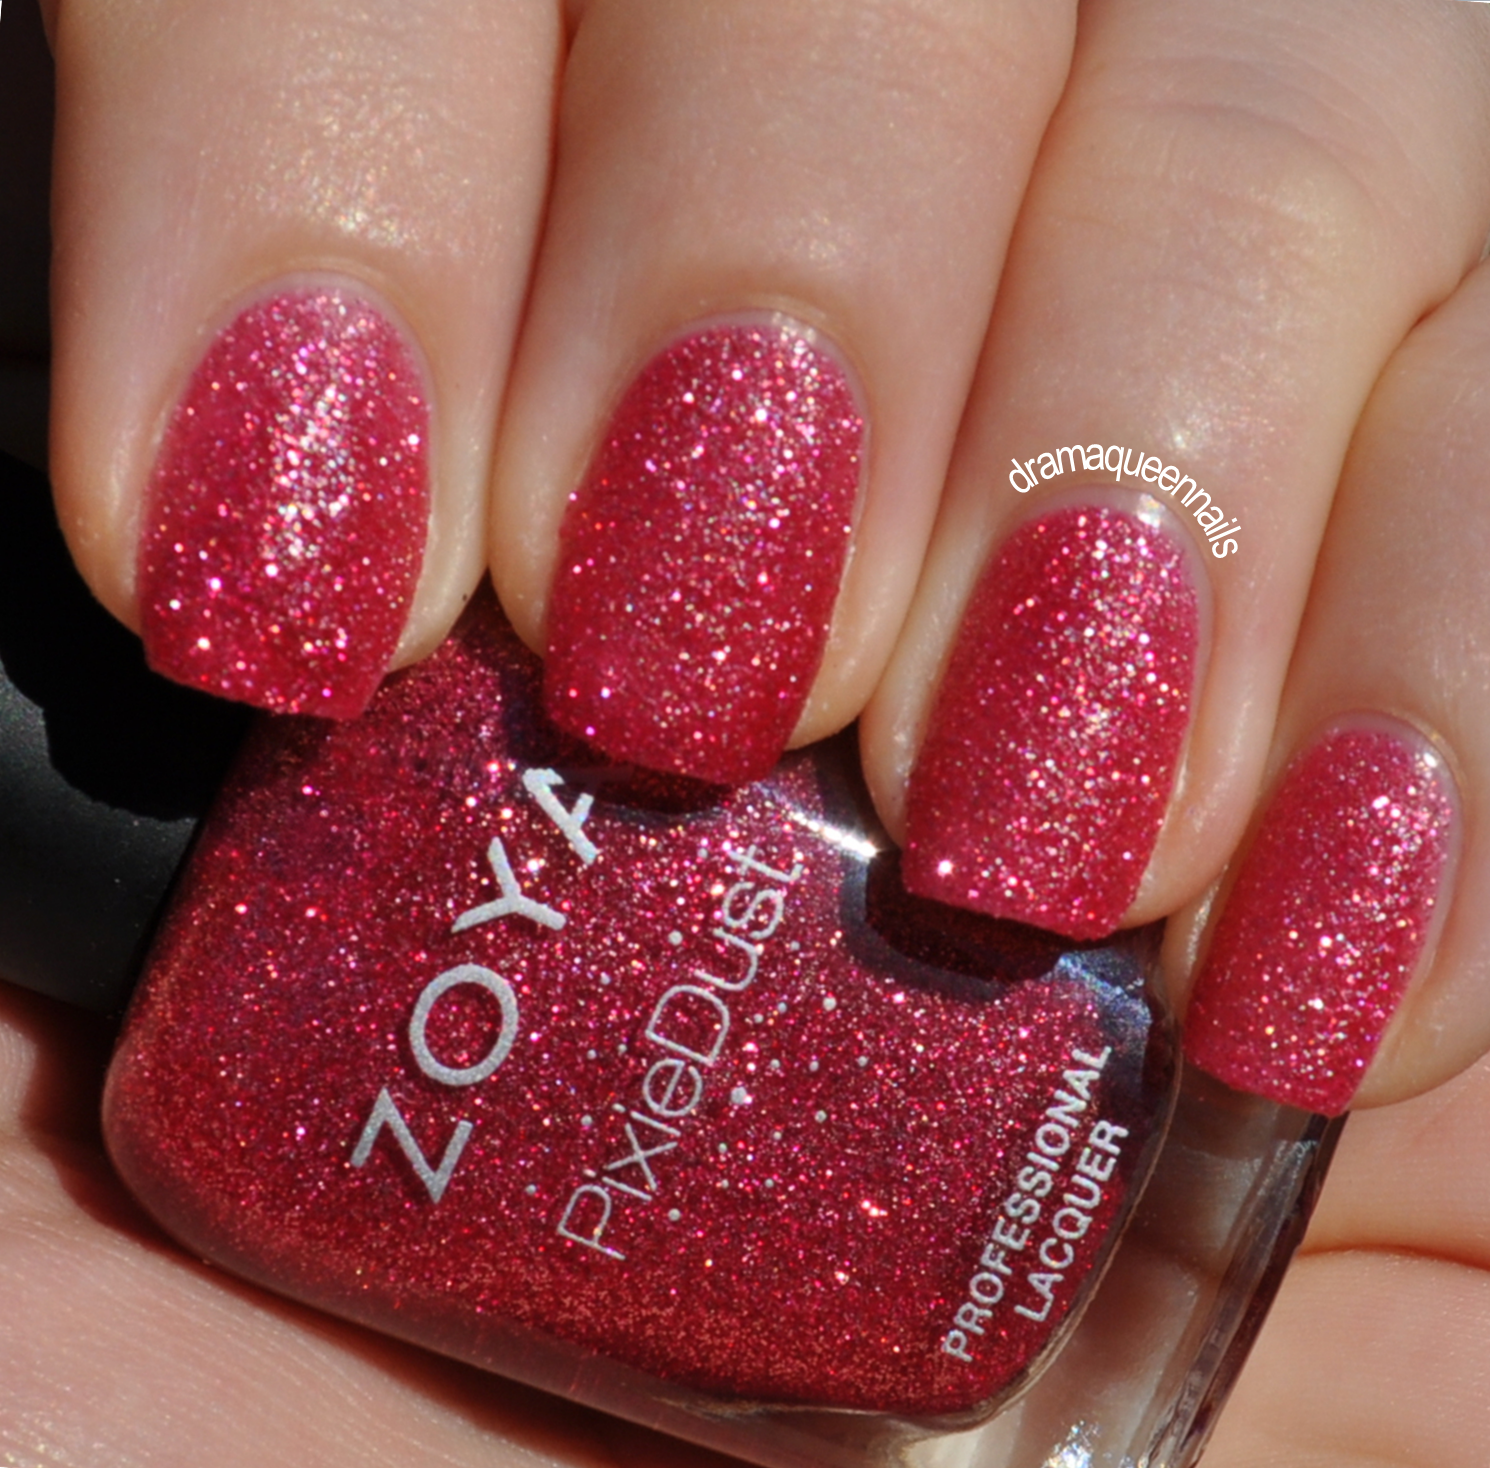 Zoya Pixie Dust Nail Polish Collection | The Non-Blonde